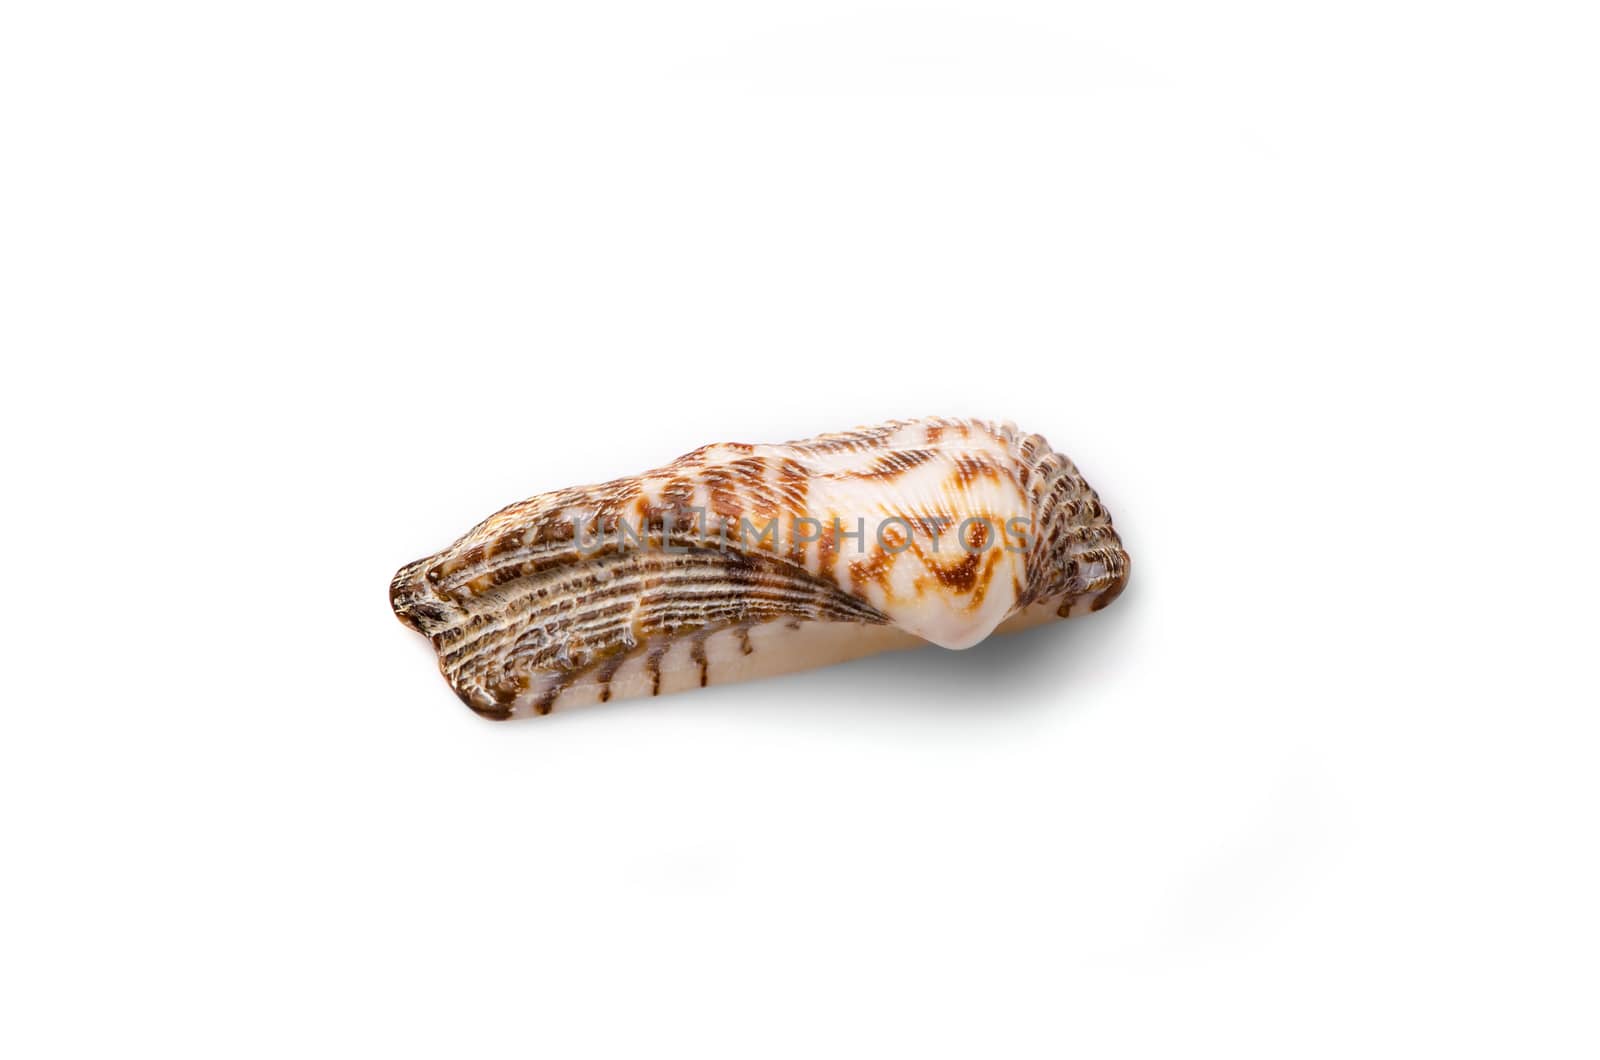 Half of a seashell isolated on white background.